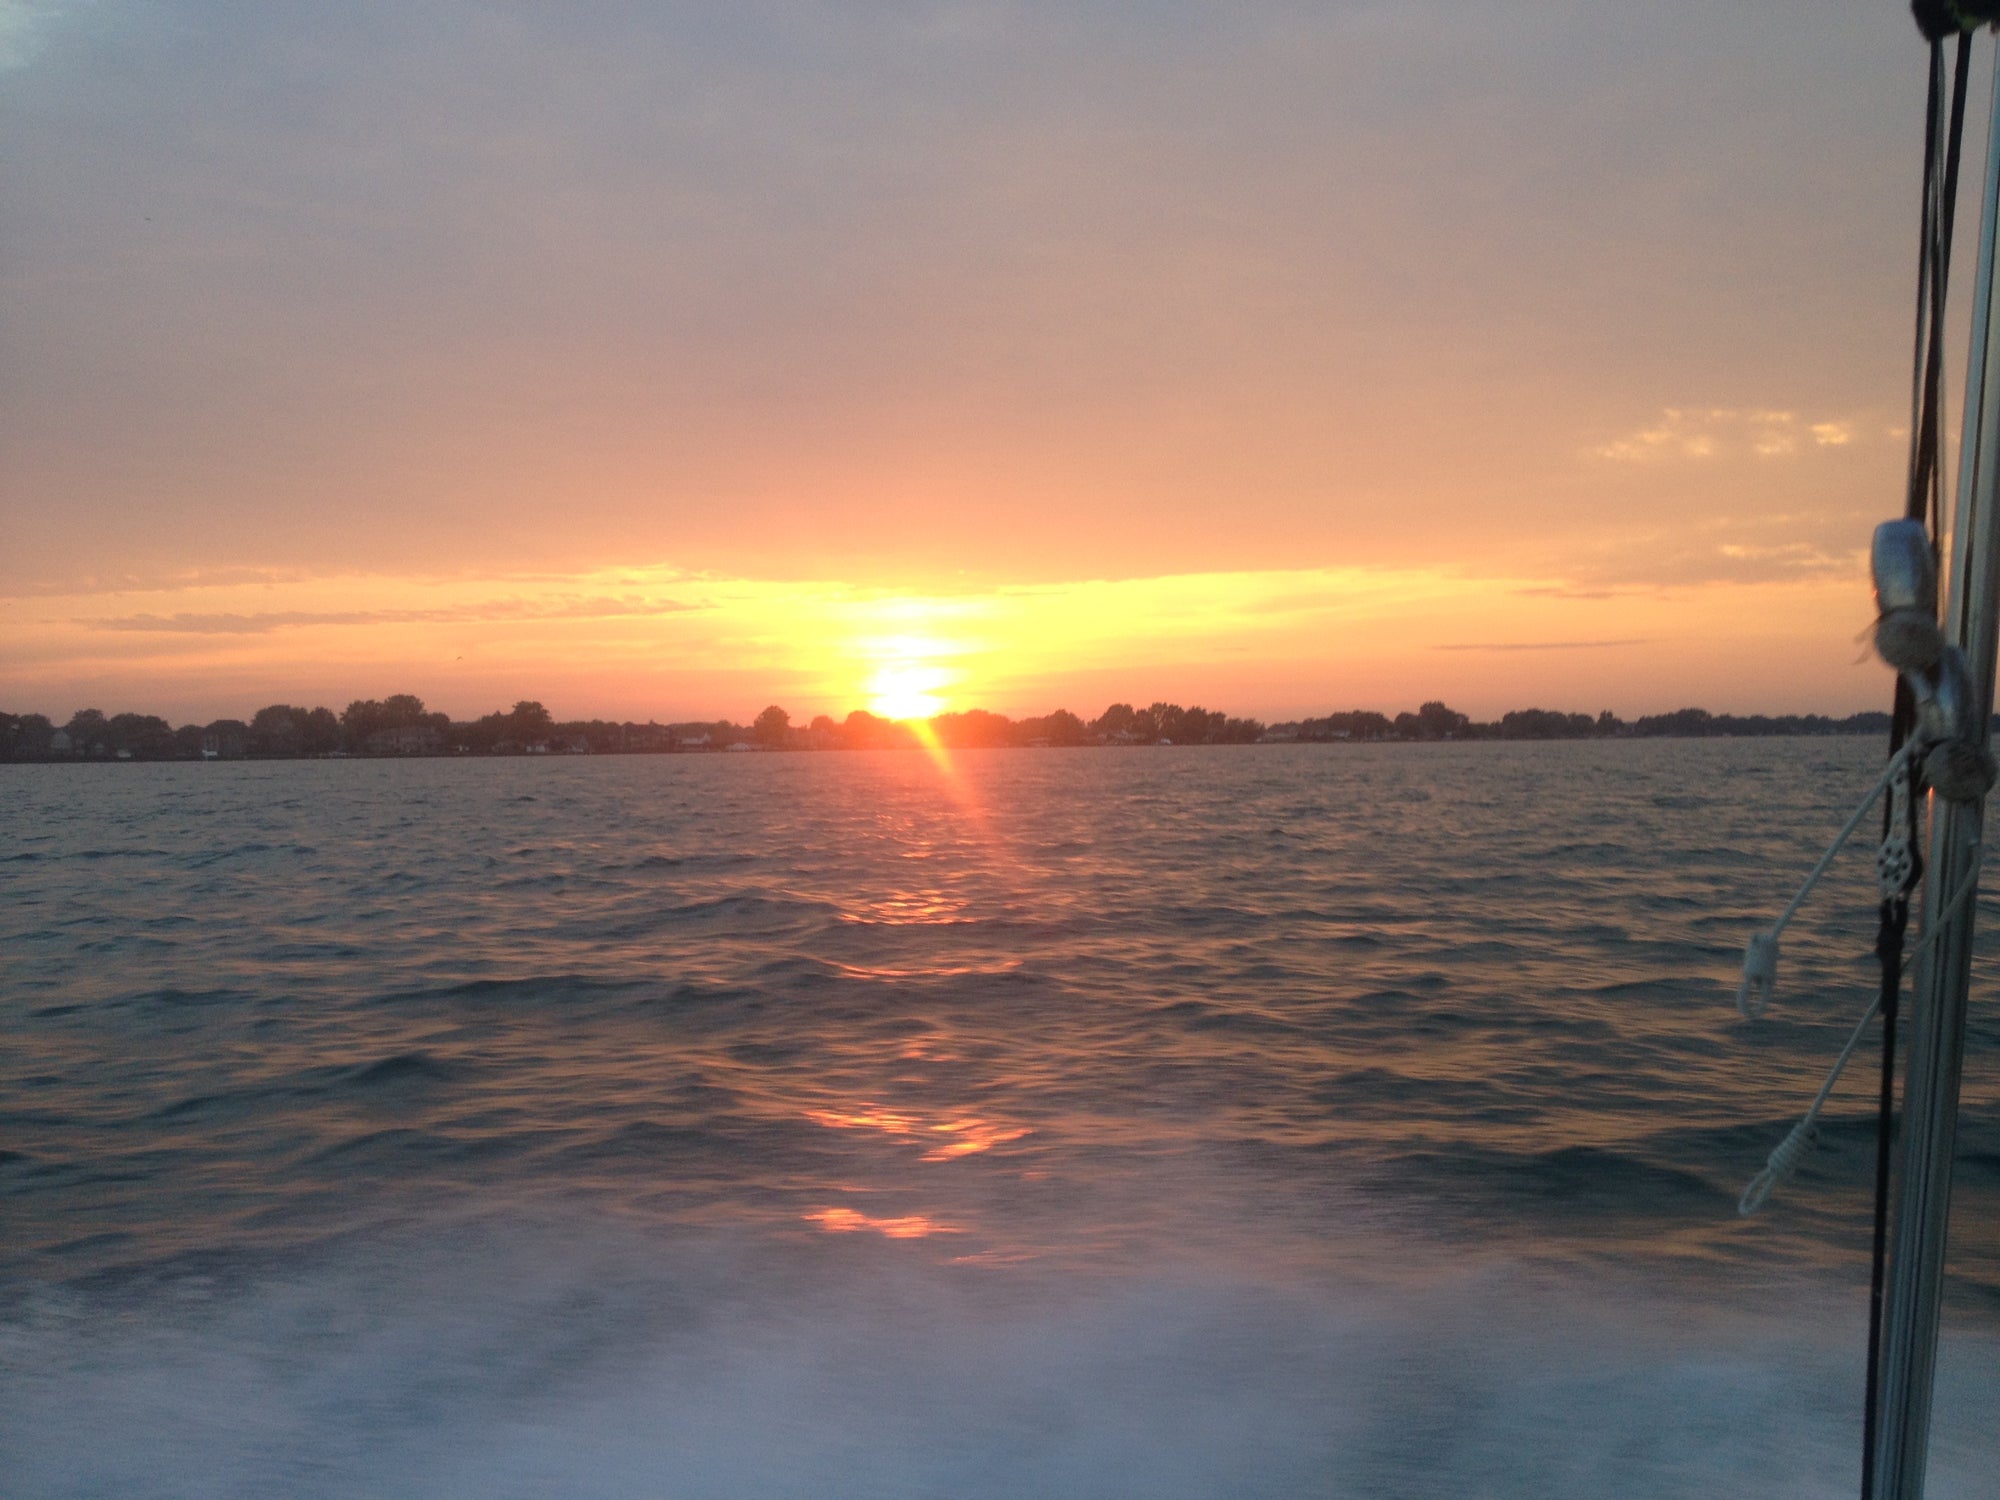 View of a sunset while on a boat ride